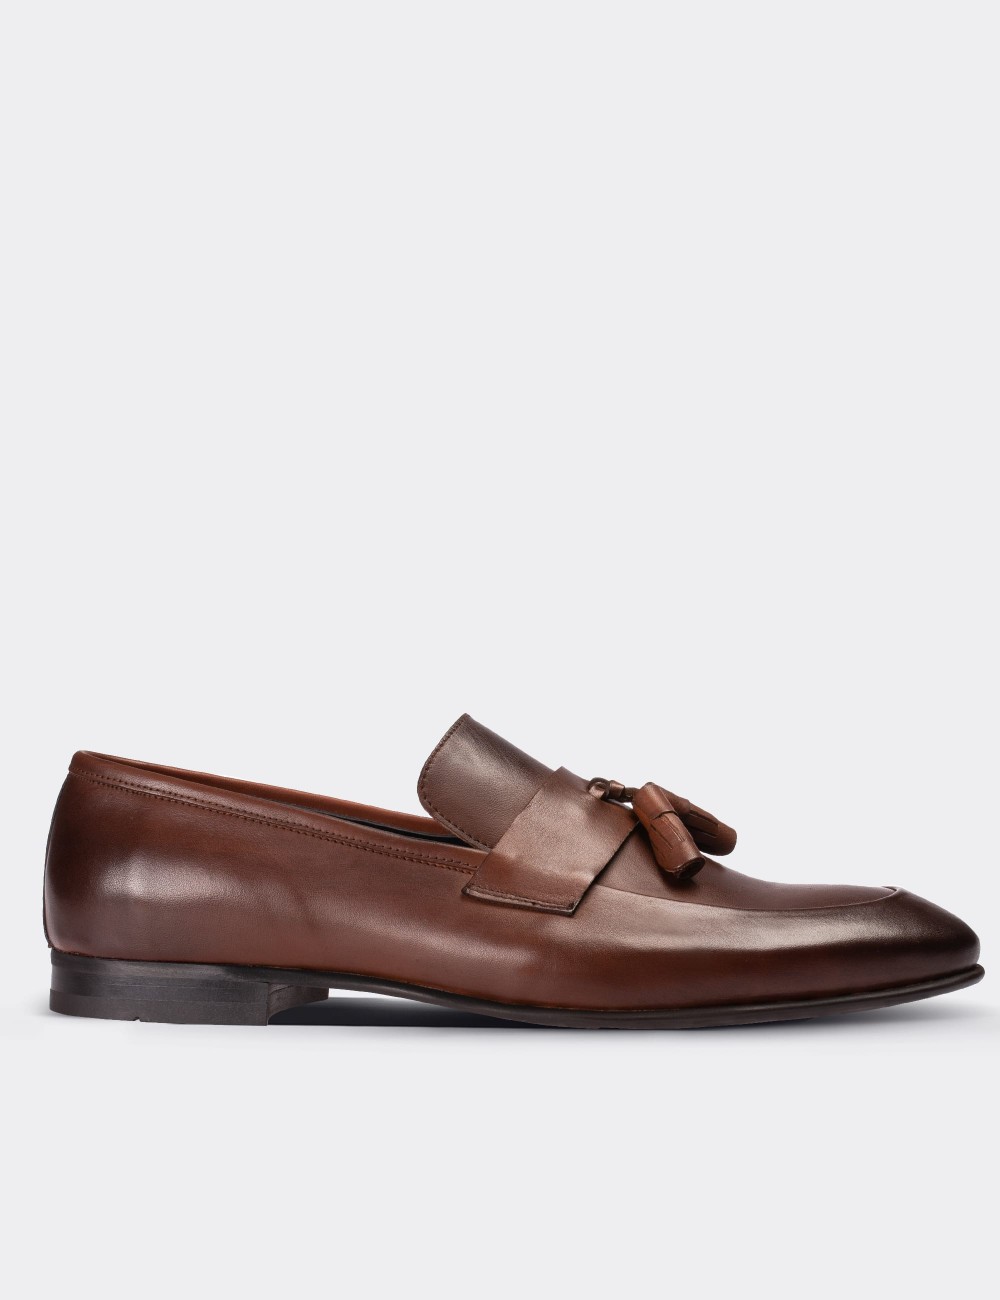 Tan  Leather Loafers Shoes - 01523MTBAM01